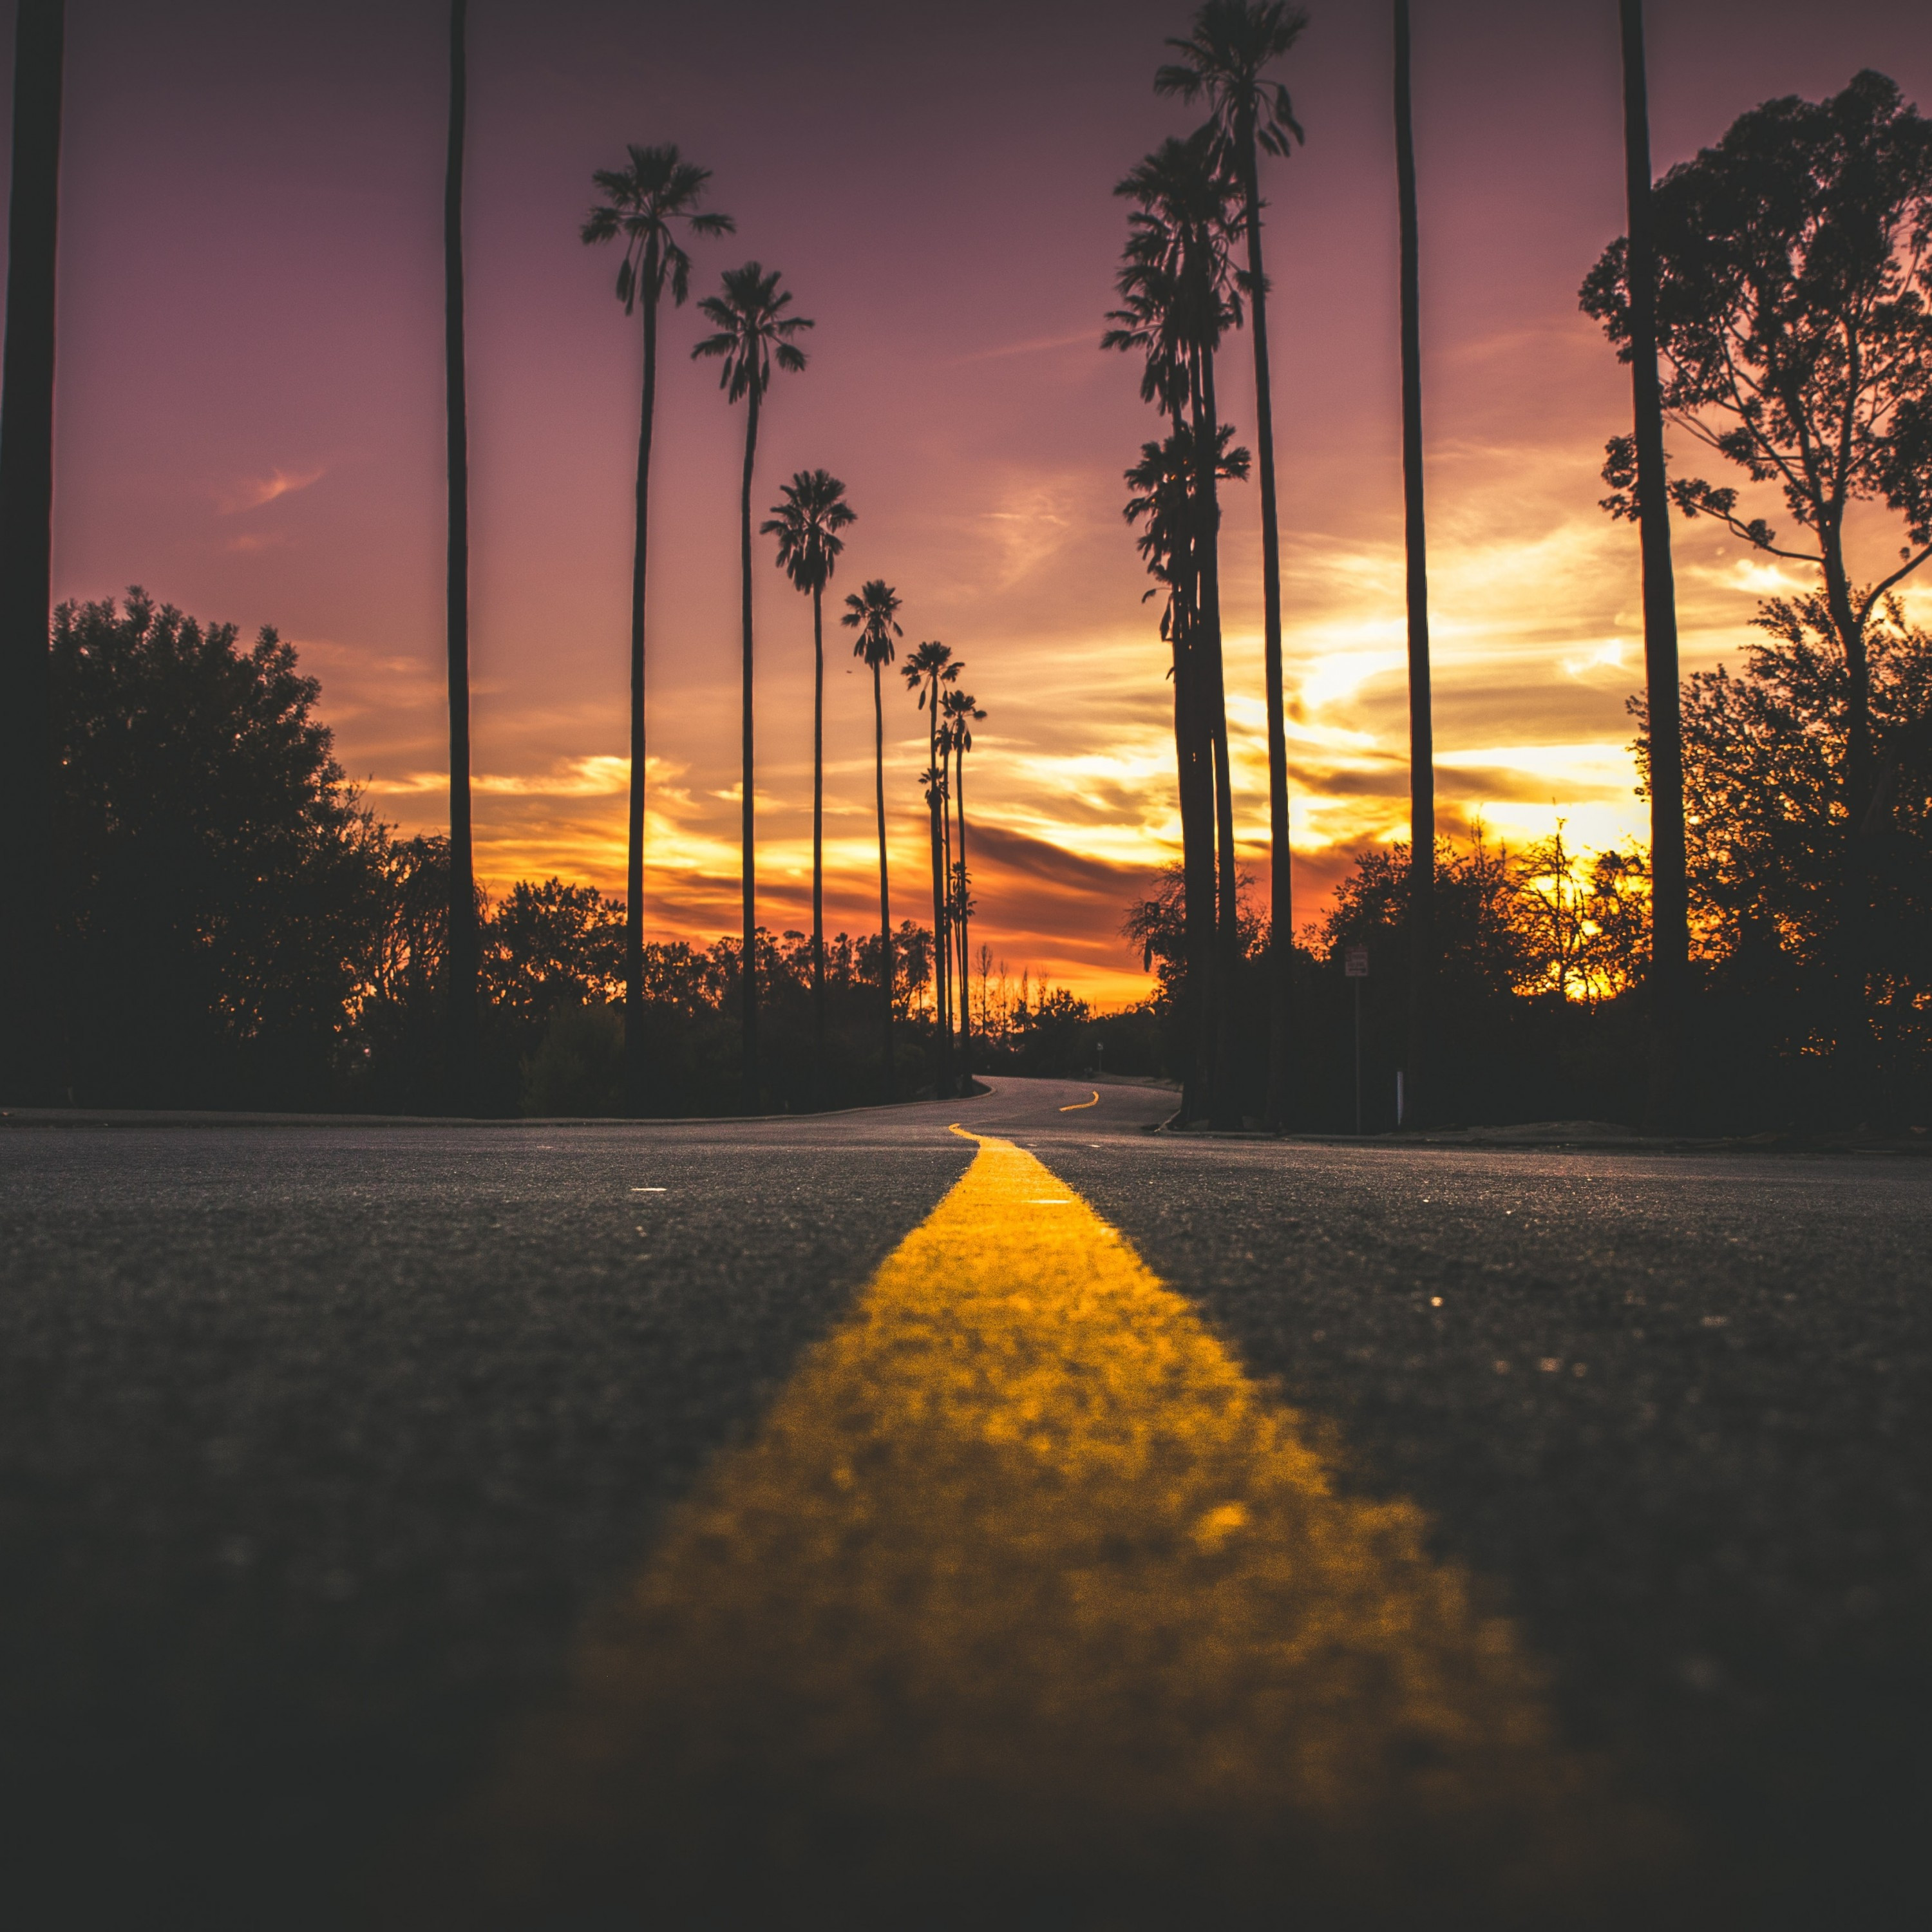 Download 3000x3000 Sunset, Dawn, Road, Scenic, Trees, Travel Wallpaper